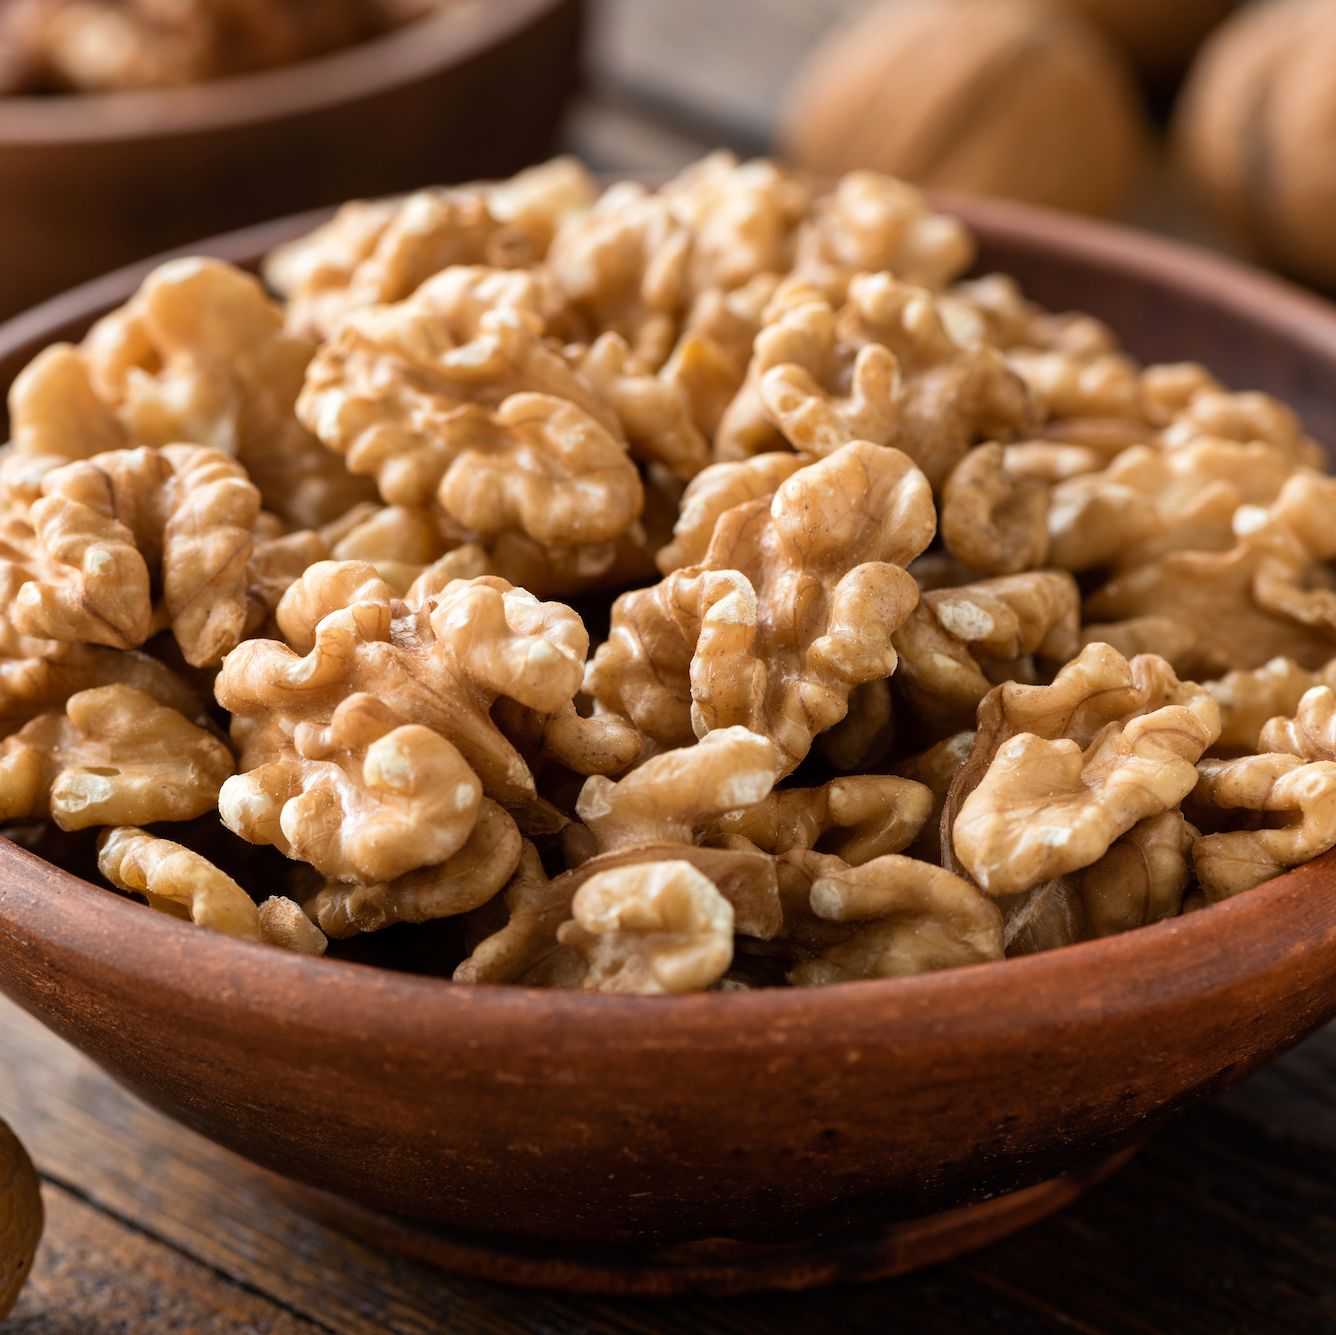 walnuts in brown bowl on wooden table, closeup view healthy food